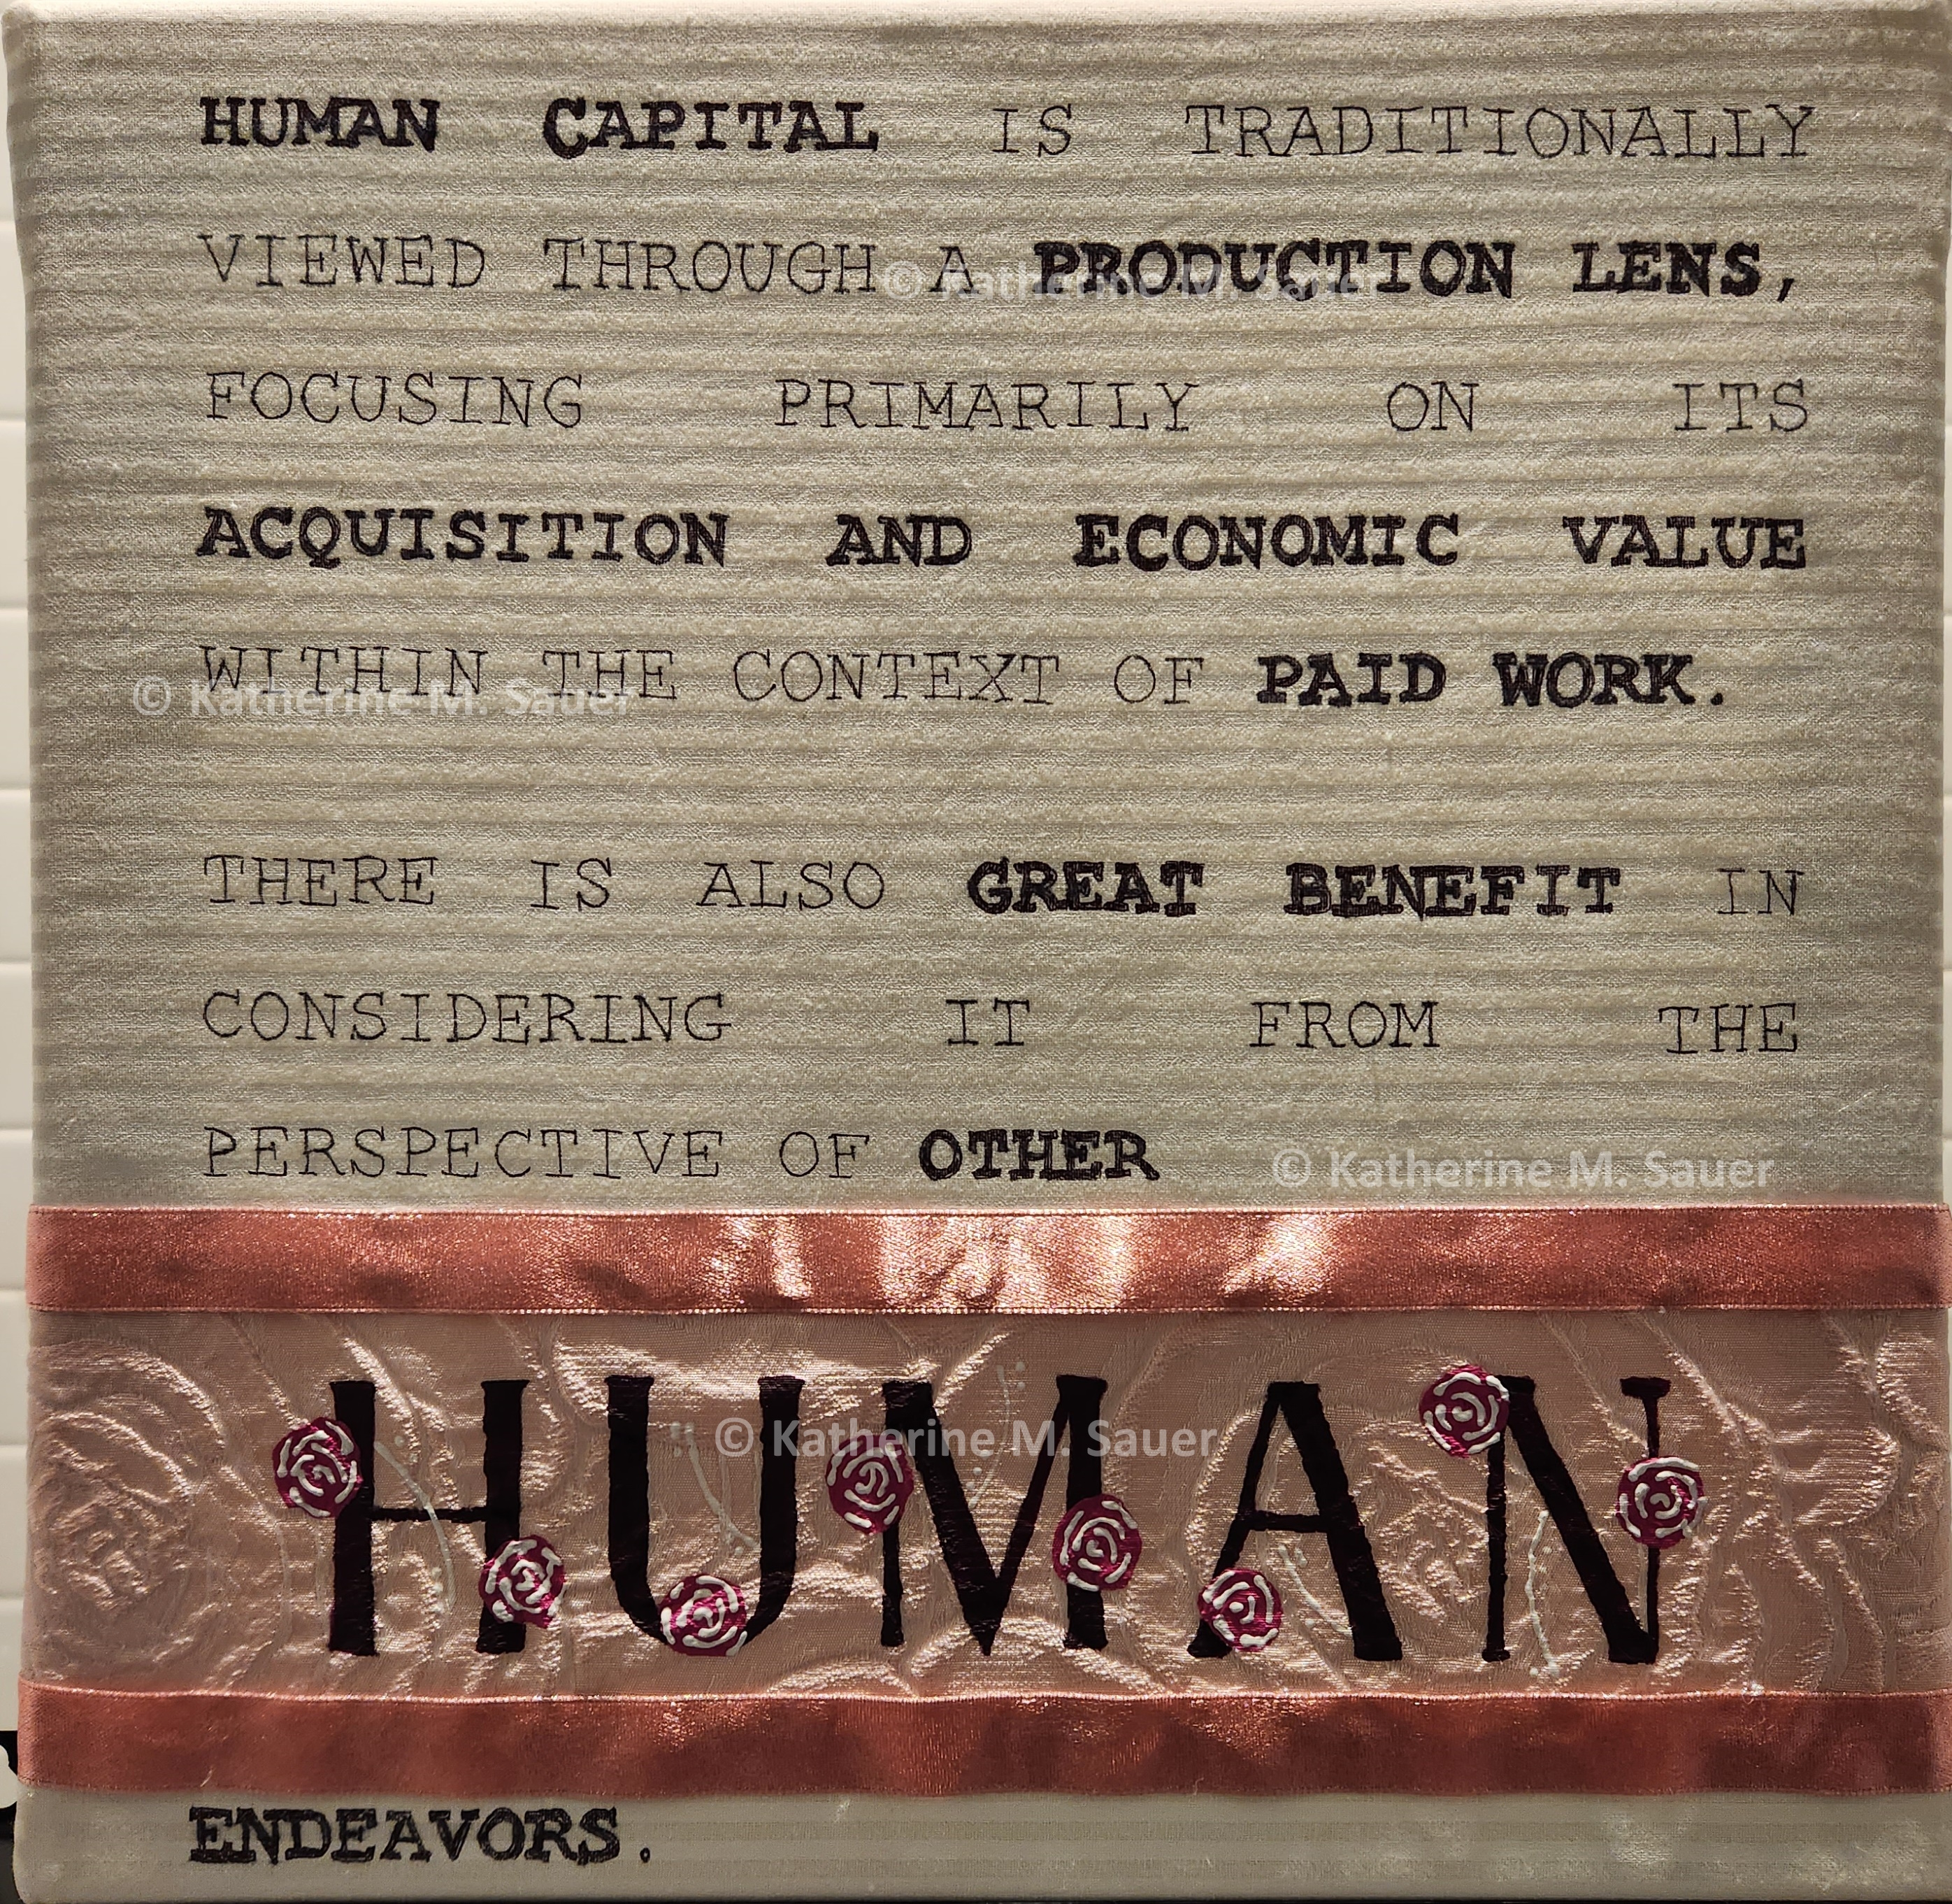 hand lettering in the style of computer font that reads 'Human capital is traditionally viewed through a production lens, focusing primarily on its acquisition and economic value within the context of paid work. There is also great benefit in considering it from the perspective of other human endeavors'. There is emphasis on the word 'human' and it is offset by ribbon and floral fabric.